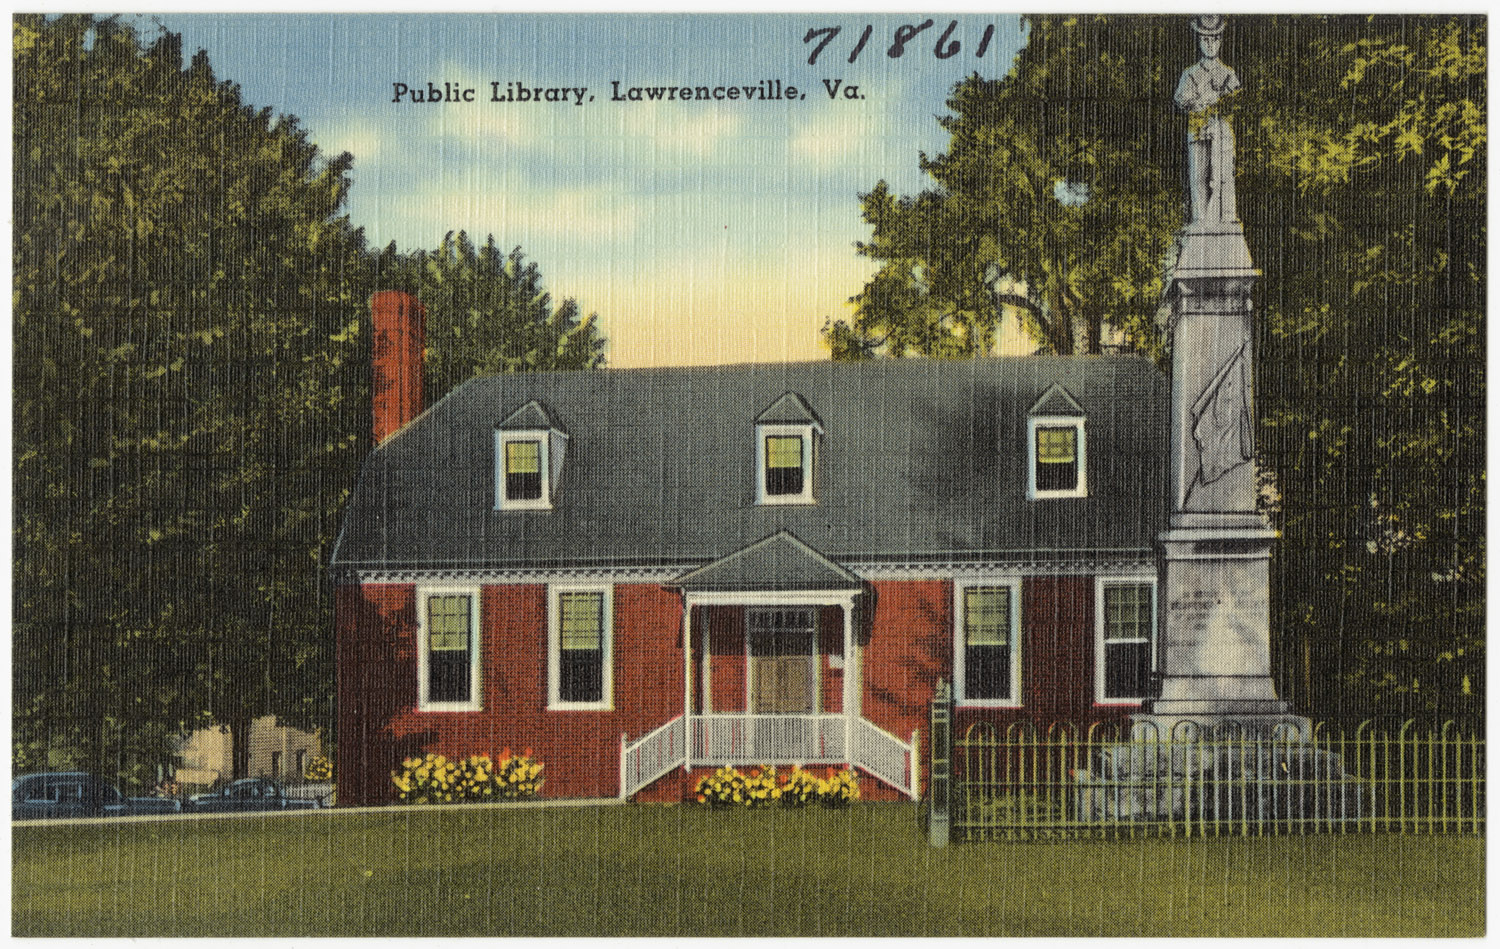 a postcard depicting a small, well - kept house with a tall chimney